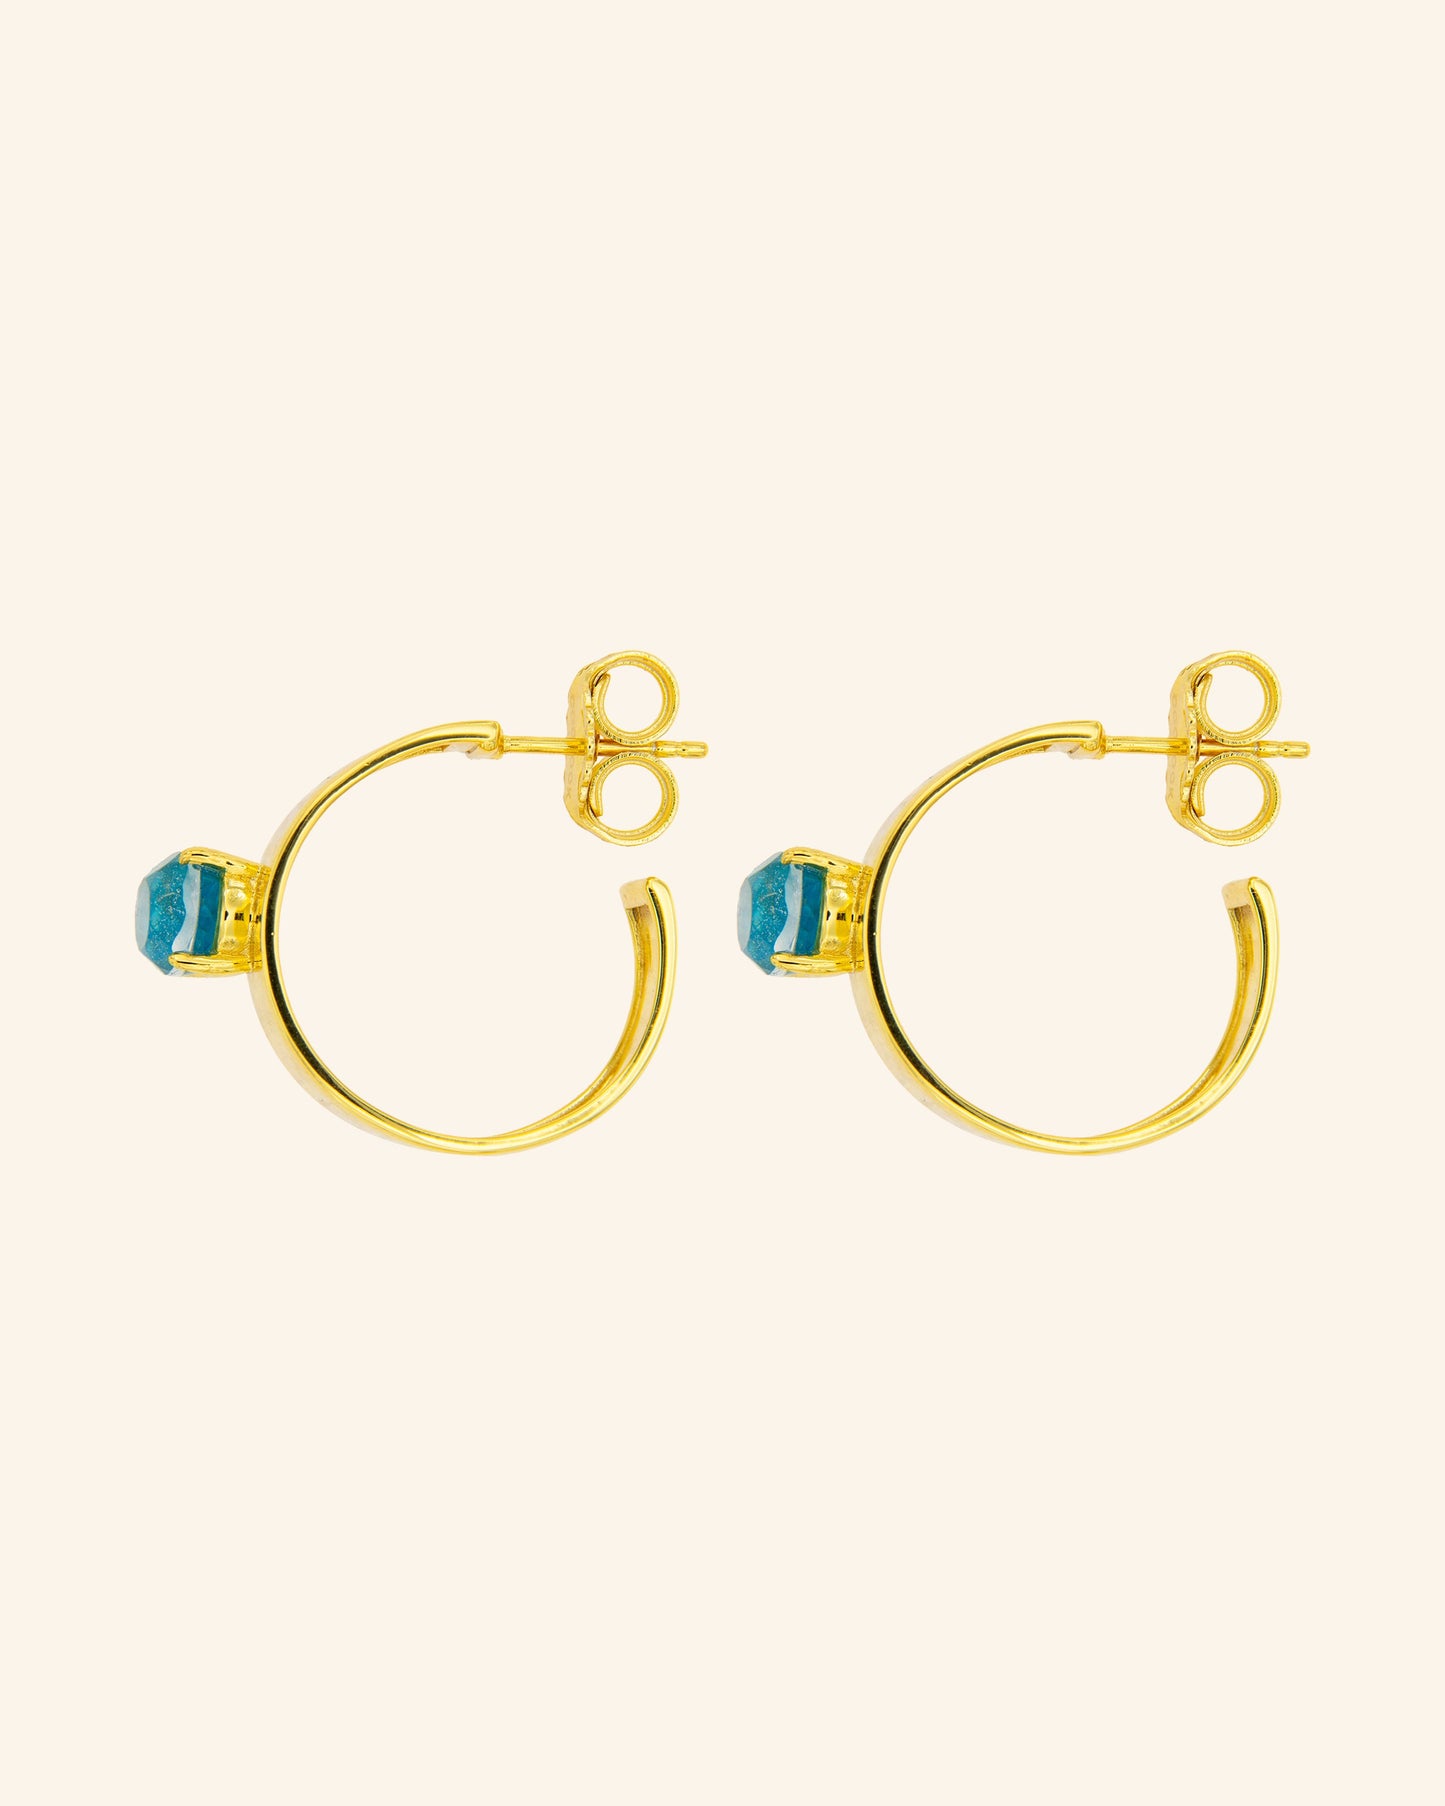 Gabo earrings with blue apatite